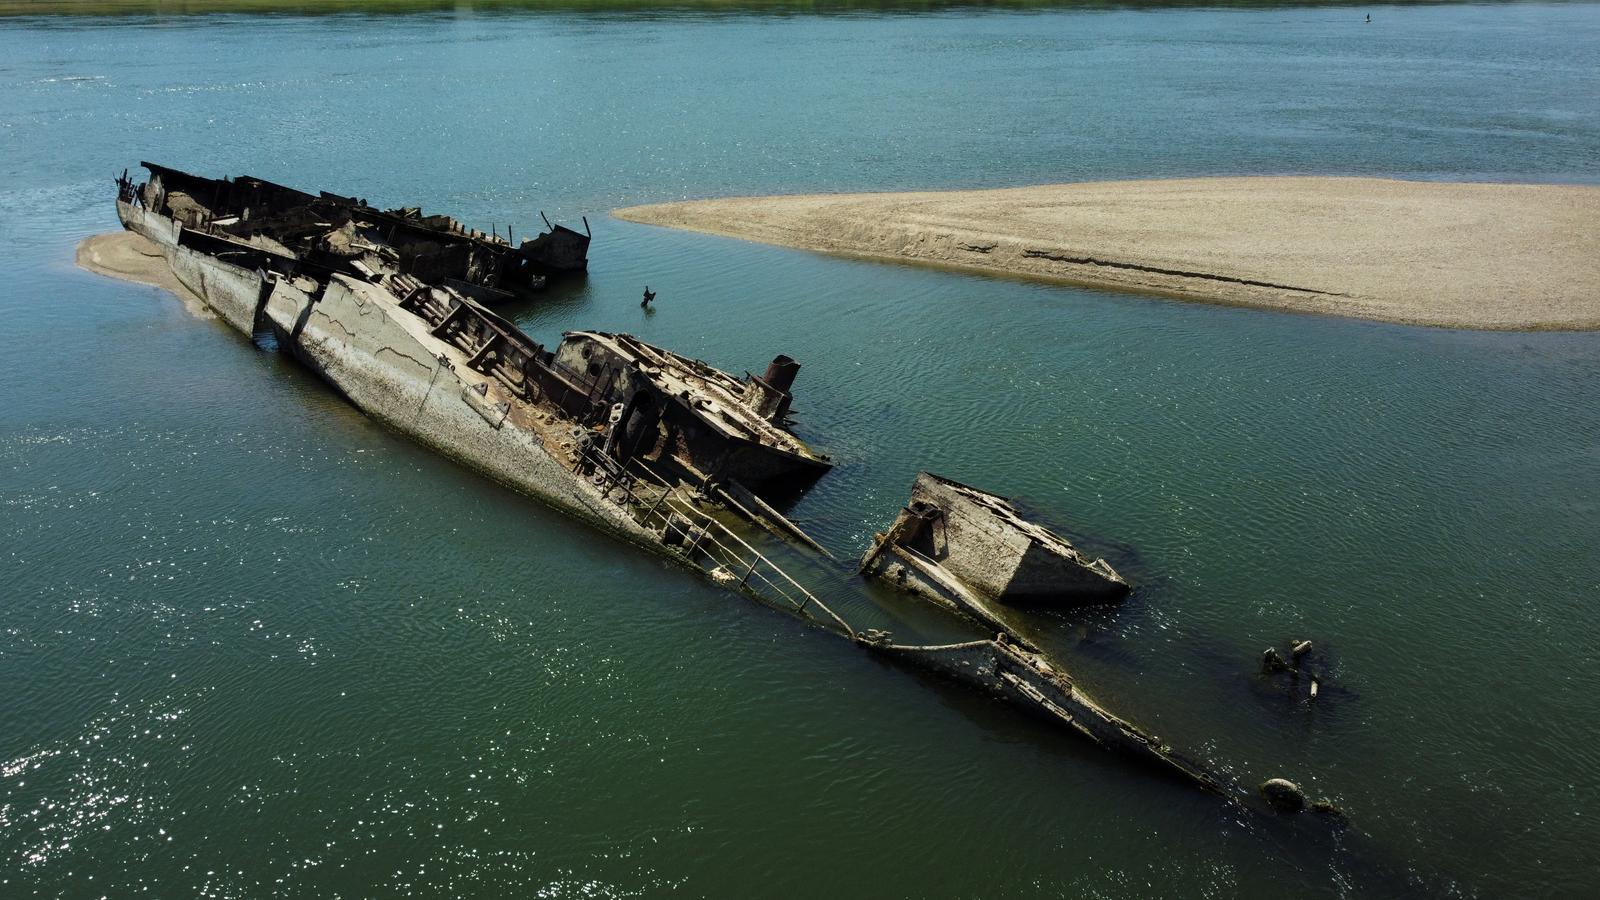 Wreckage of a World War Two German warship is seen in the Danube in Prahovo, Serbia August 18, 2022. REUTERS/Fedja Grulovic Photo: FEDJA GRULOVIC/REUTERS